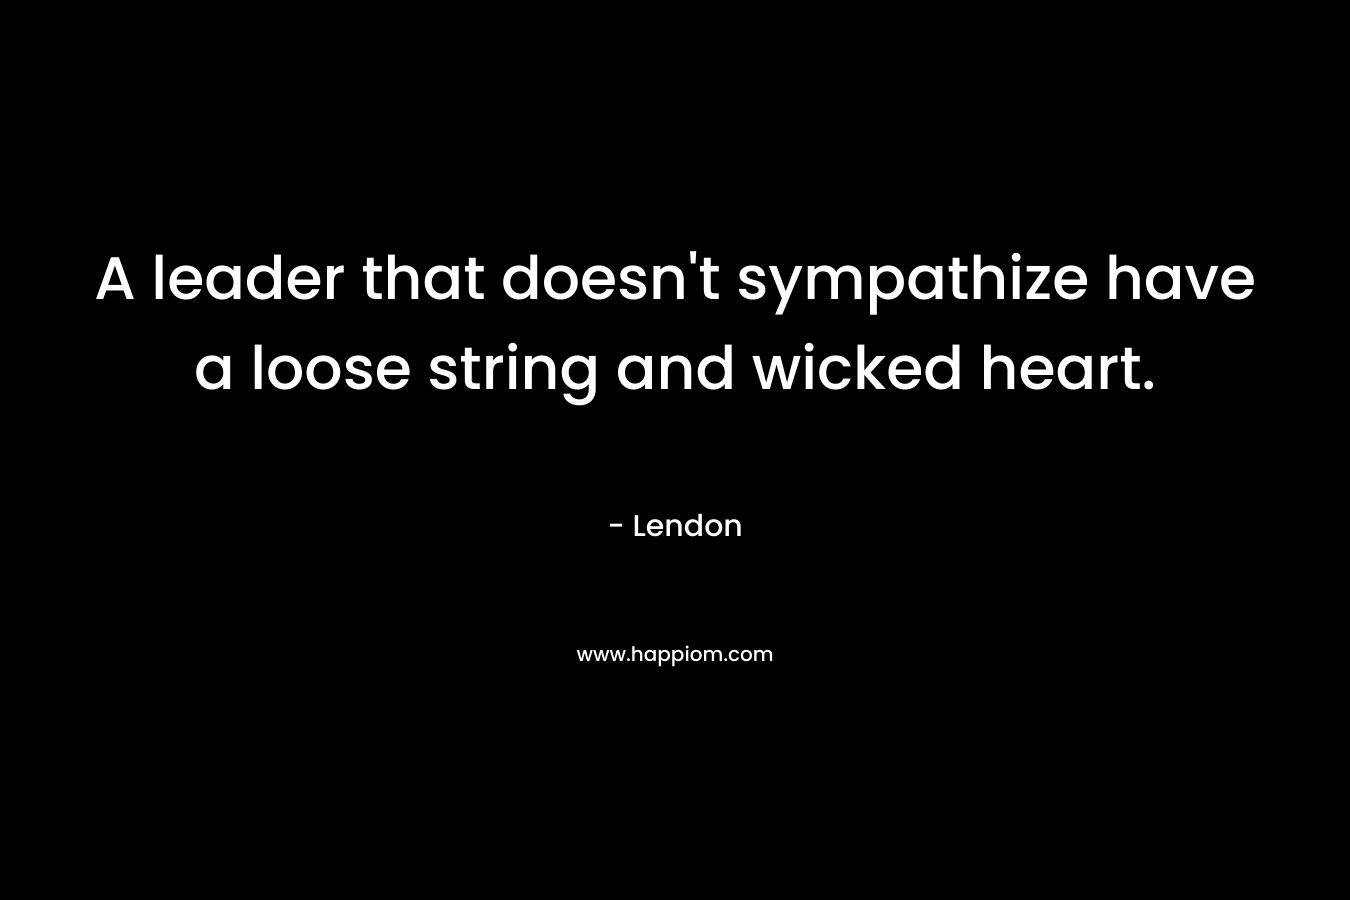 A leader that doesn't sympathize have a loose string and wicked heart.